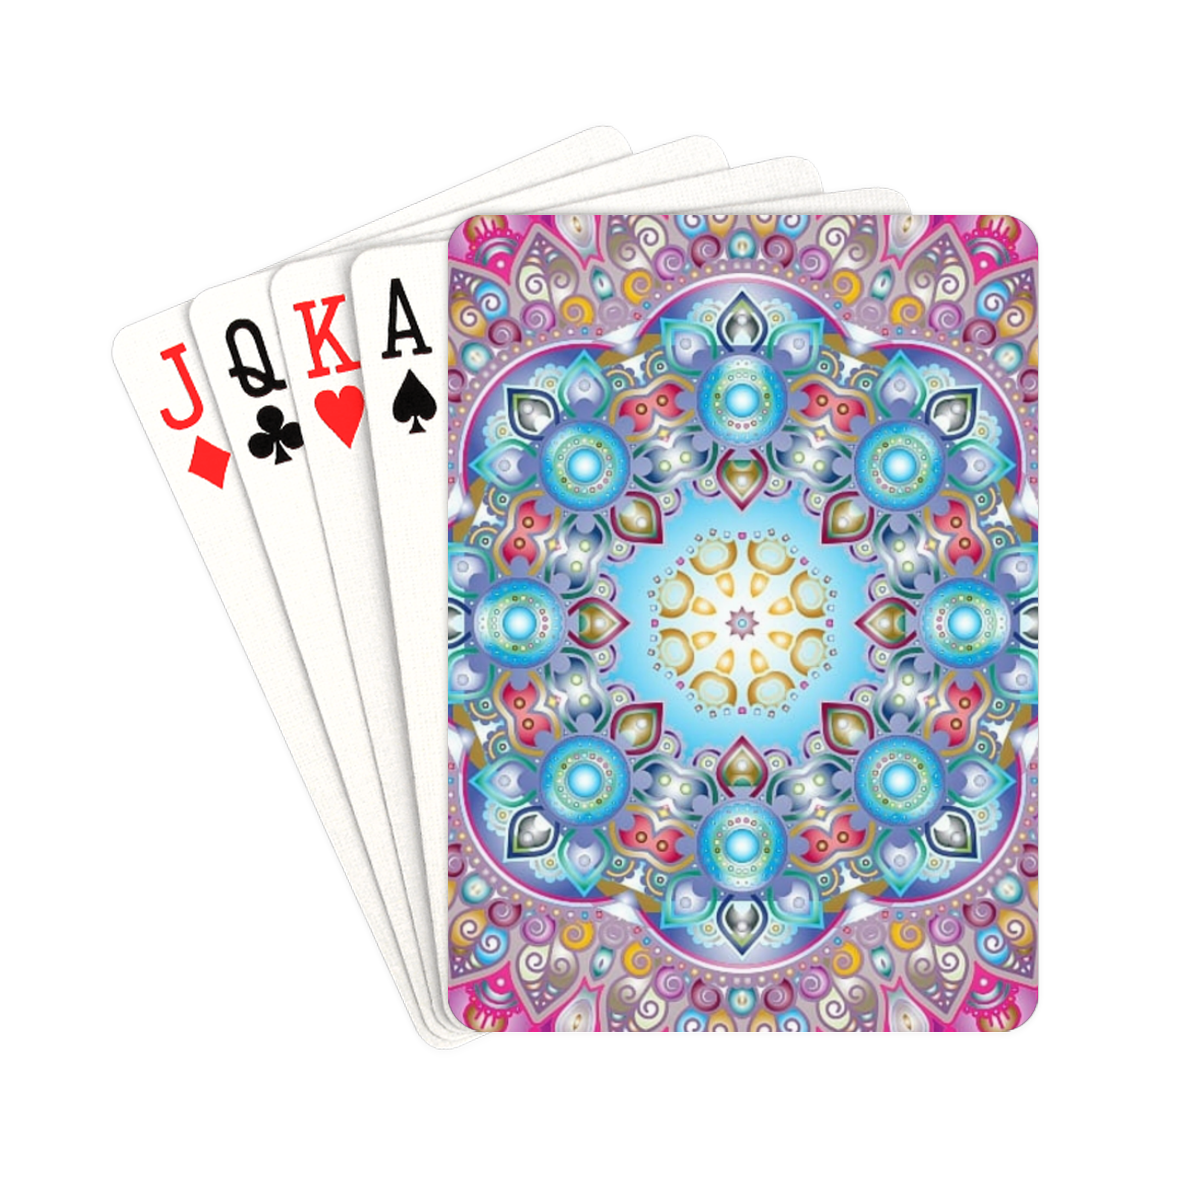 MANDALA DIAMONDS ARE FOREVER Playing Cards 2.5"x3.5"